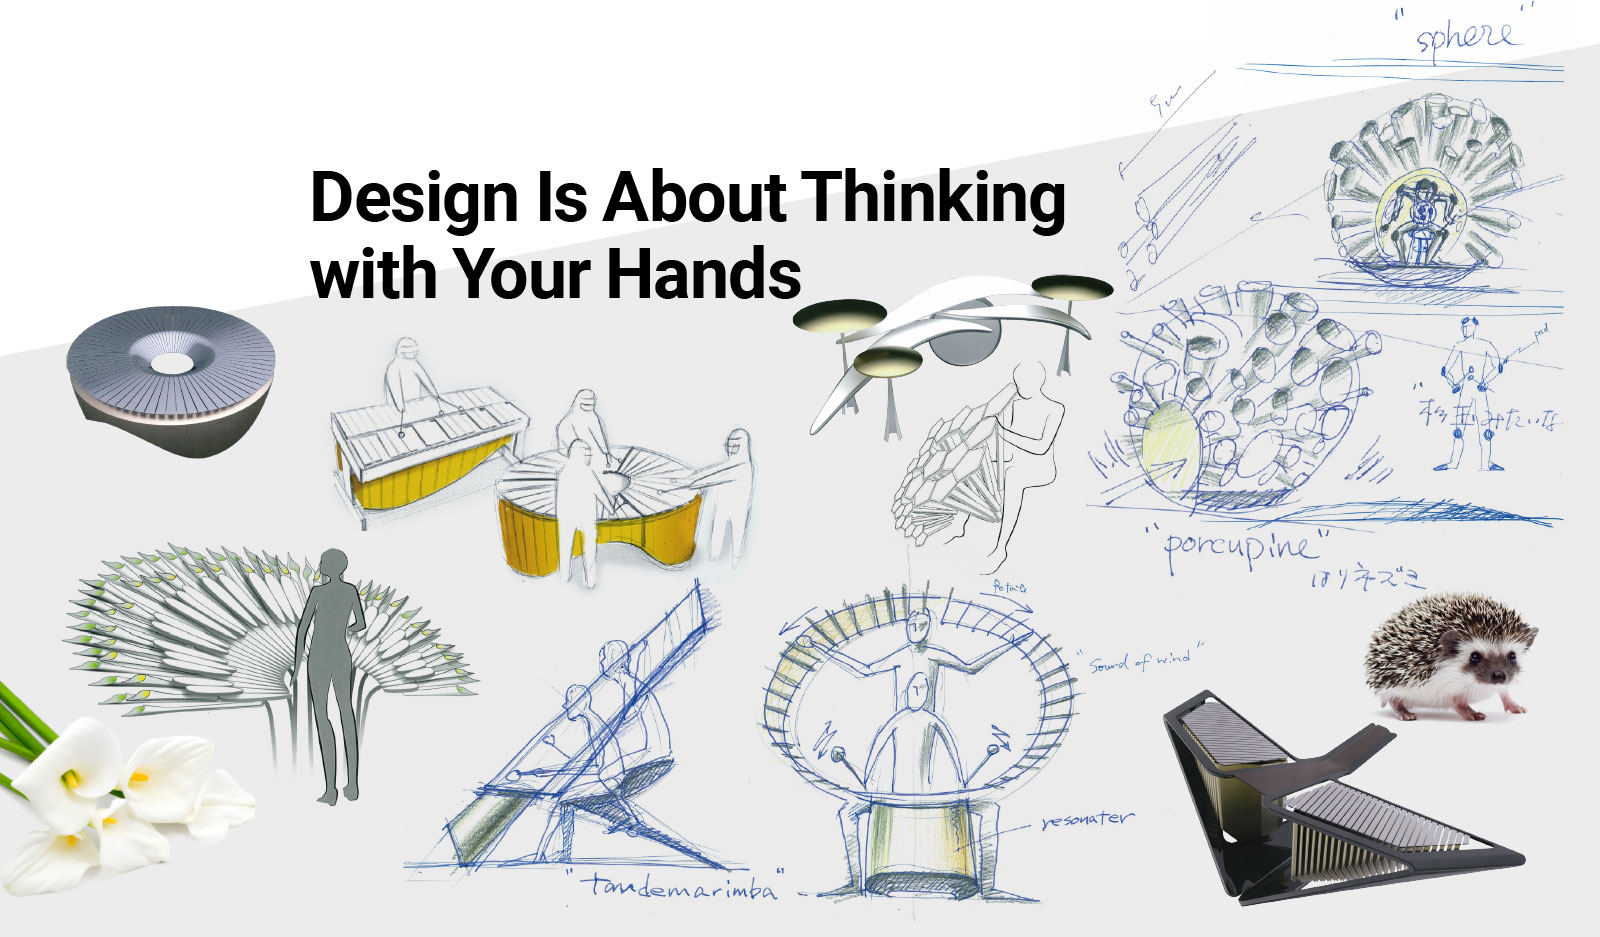 Design Is About Thinking with Your Hands